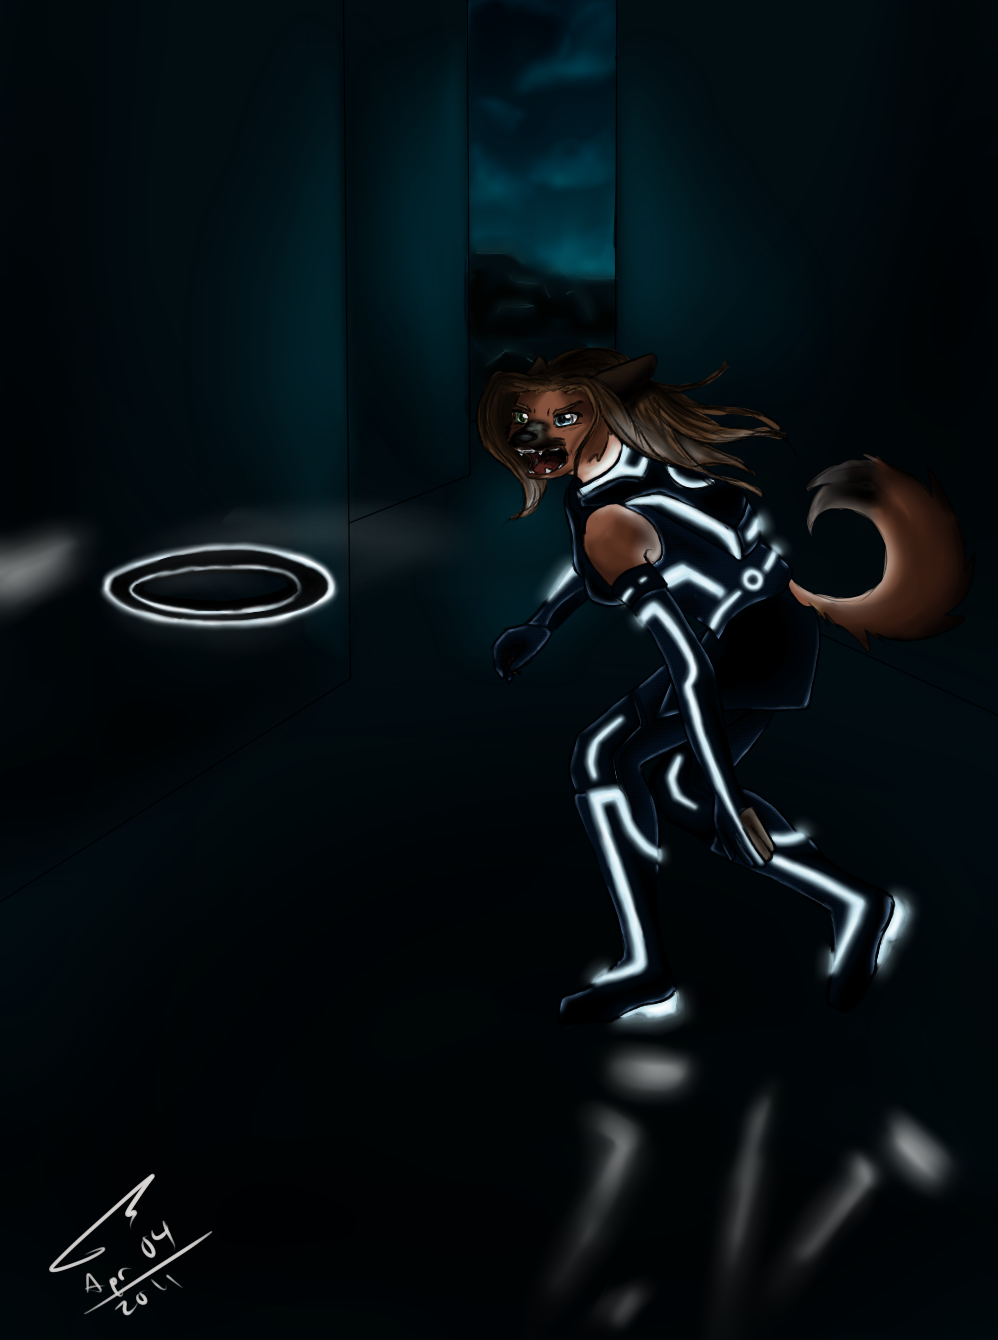 angry attempt brown_fur canine dark dog escape female flee frisbee fur glowing hair identity_disc kyuushi light mad mammal orange reflection running suit throw tron tron_legacy wolf